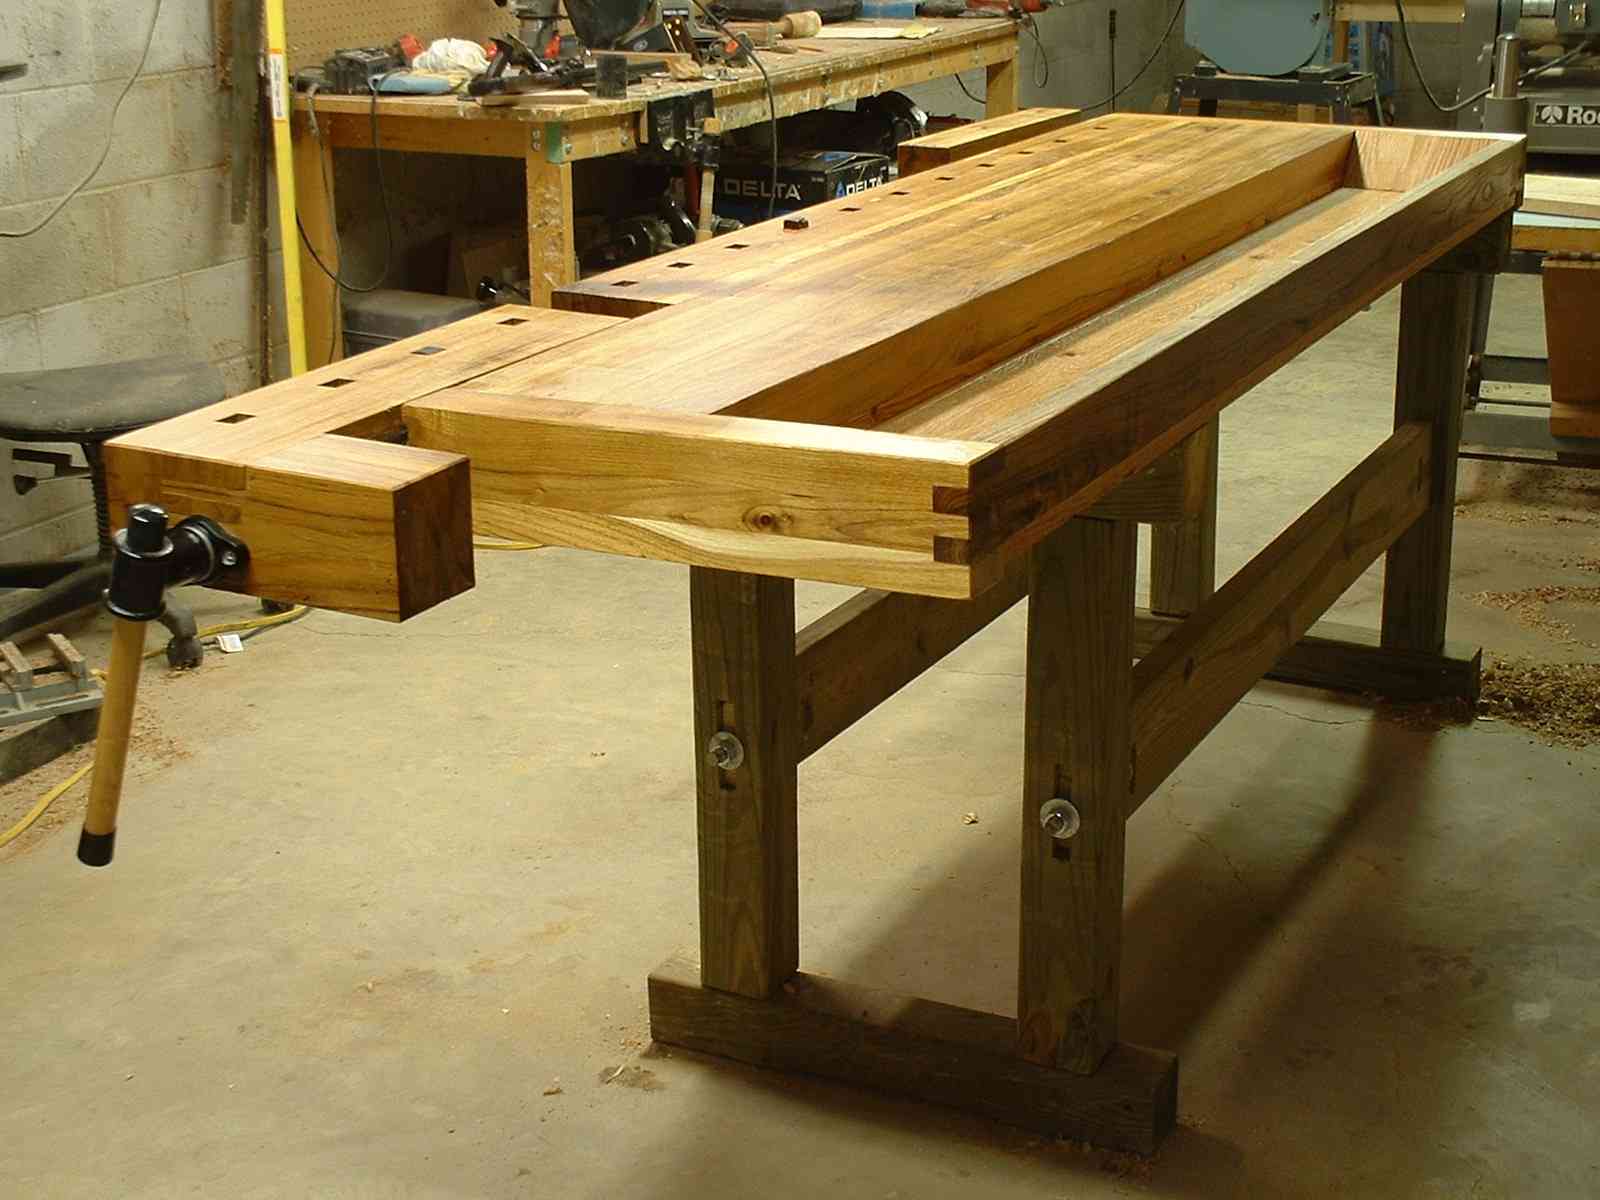 designing a workbench - Woodworking Talk - Woodworkers Forum